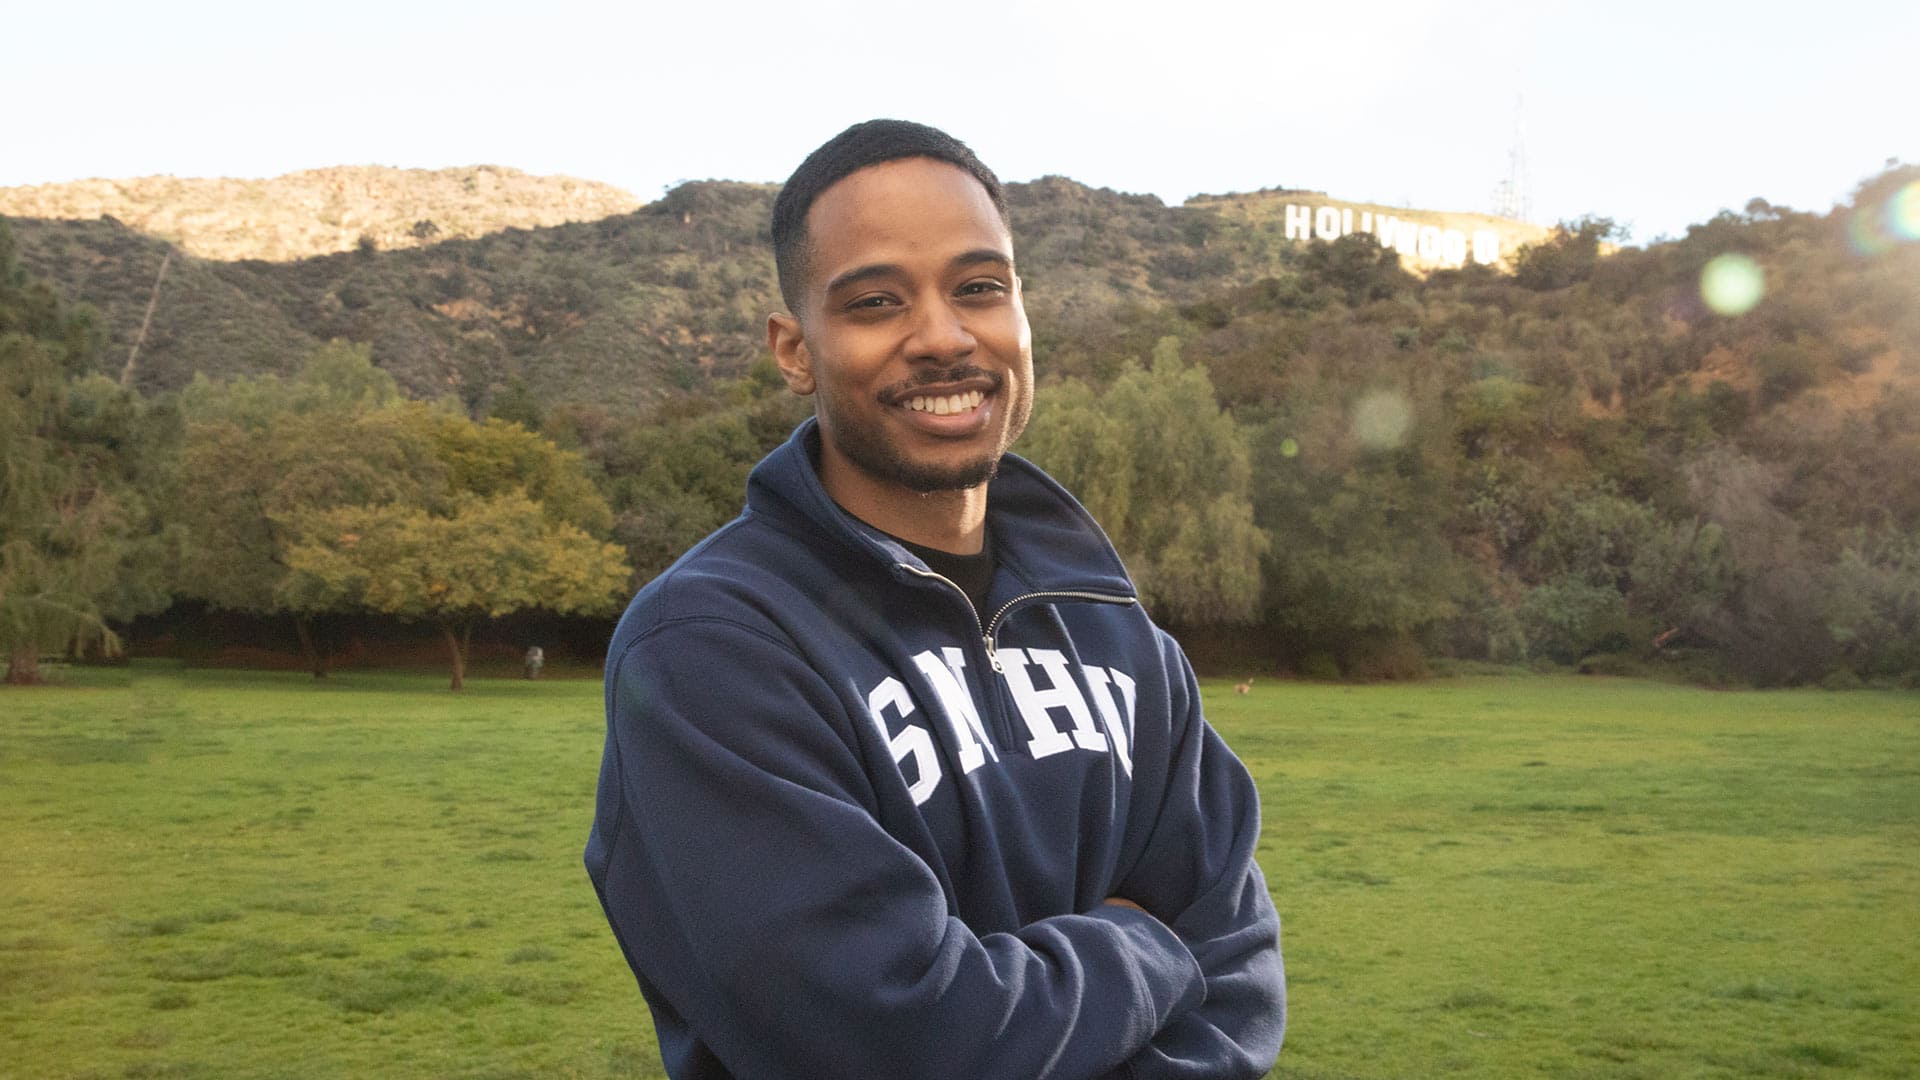 Keyon Tuiteleleapaga, who earned his degree from SNHU in 2024, wearing a dark blue SNHU sweatshirt smiling with his arms folded standing in a grass field with trees and the Hollywood sign in the distance behind him.